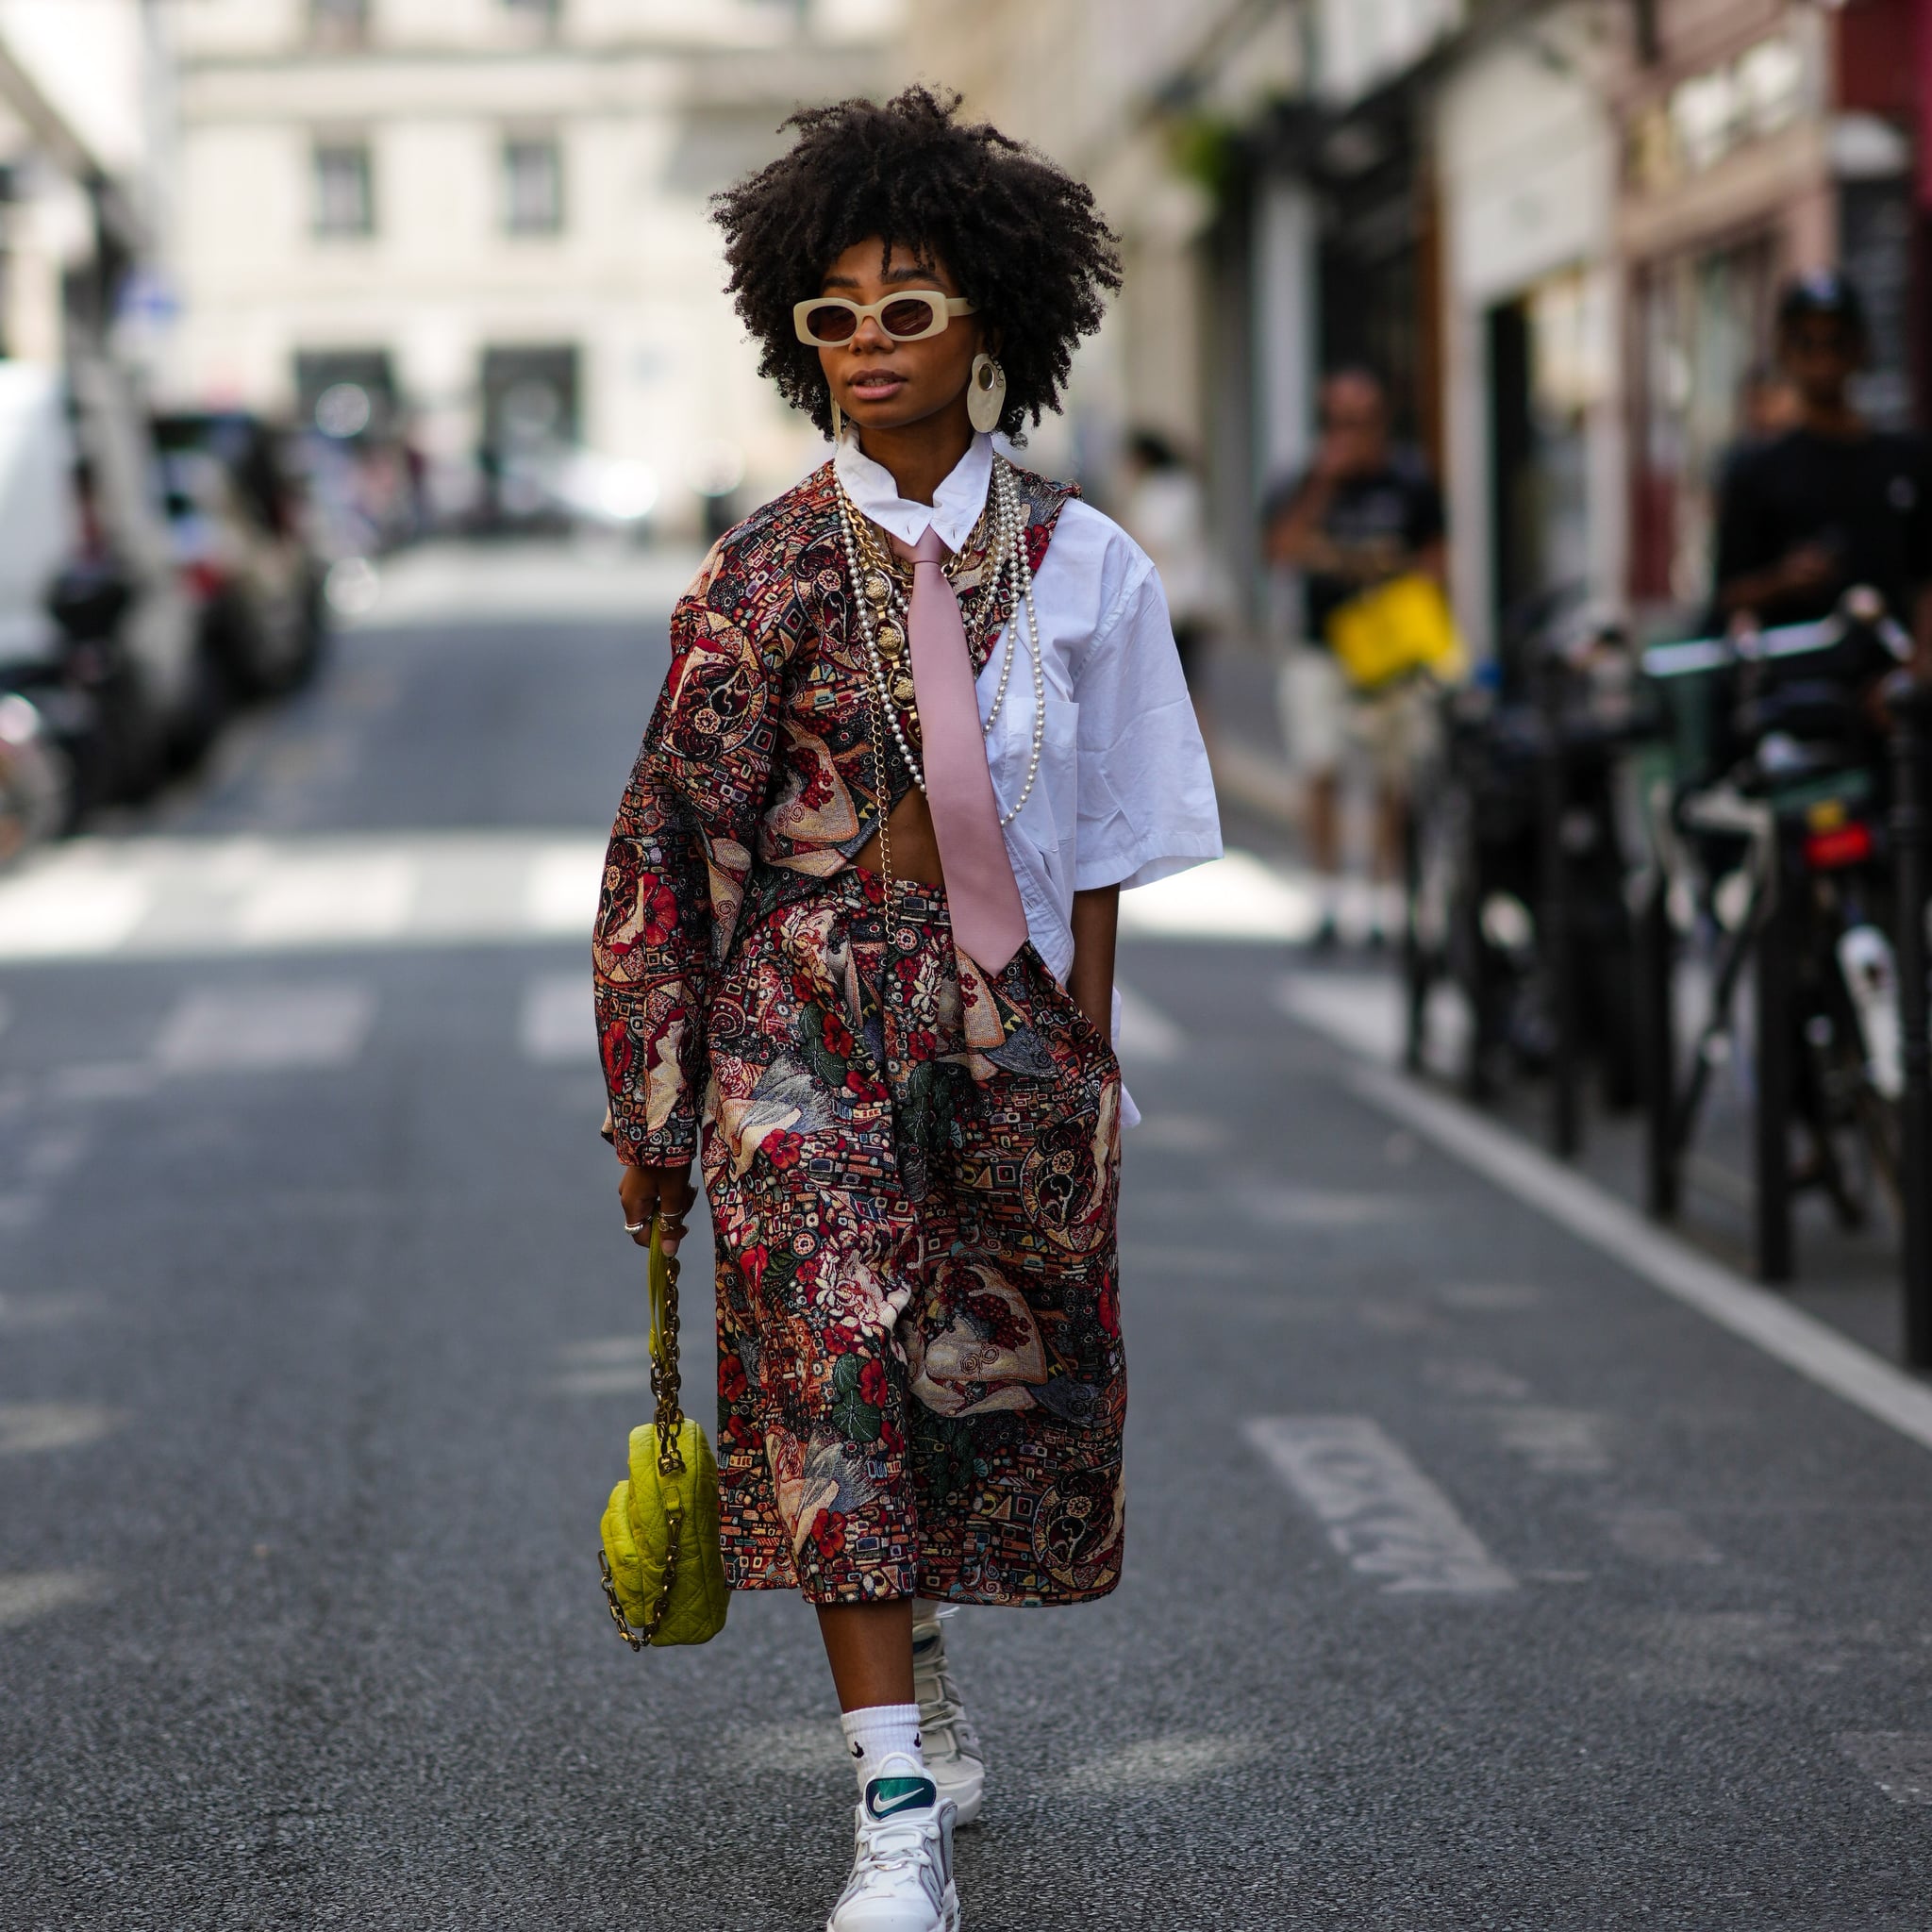 presume lucky Concise How to Wear a Dress With Sneakers | POPSUGAR Fashion